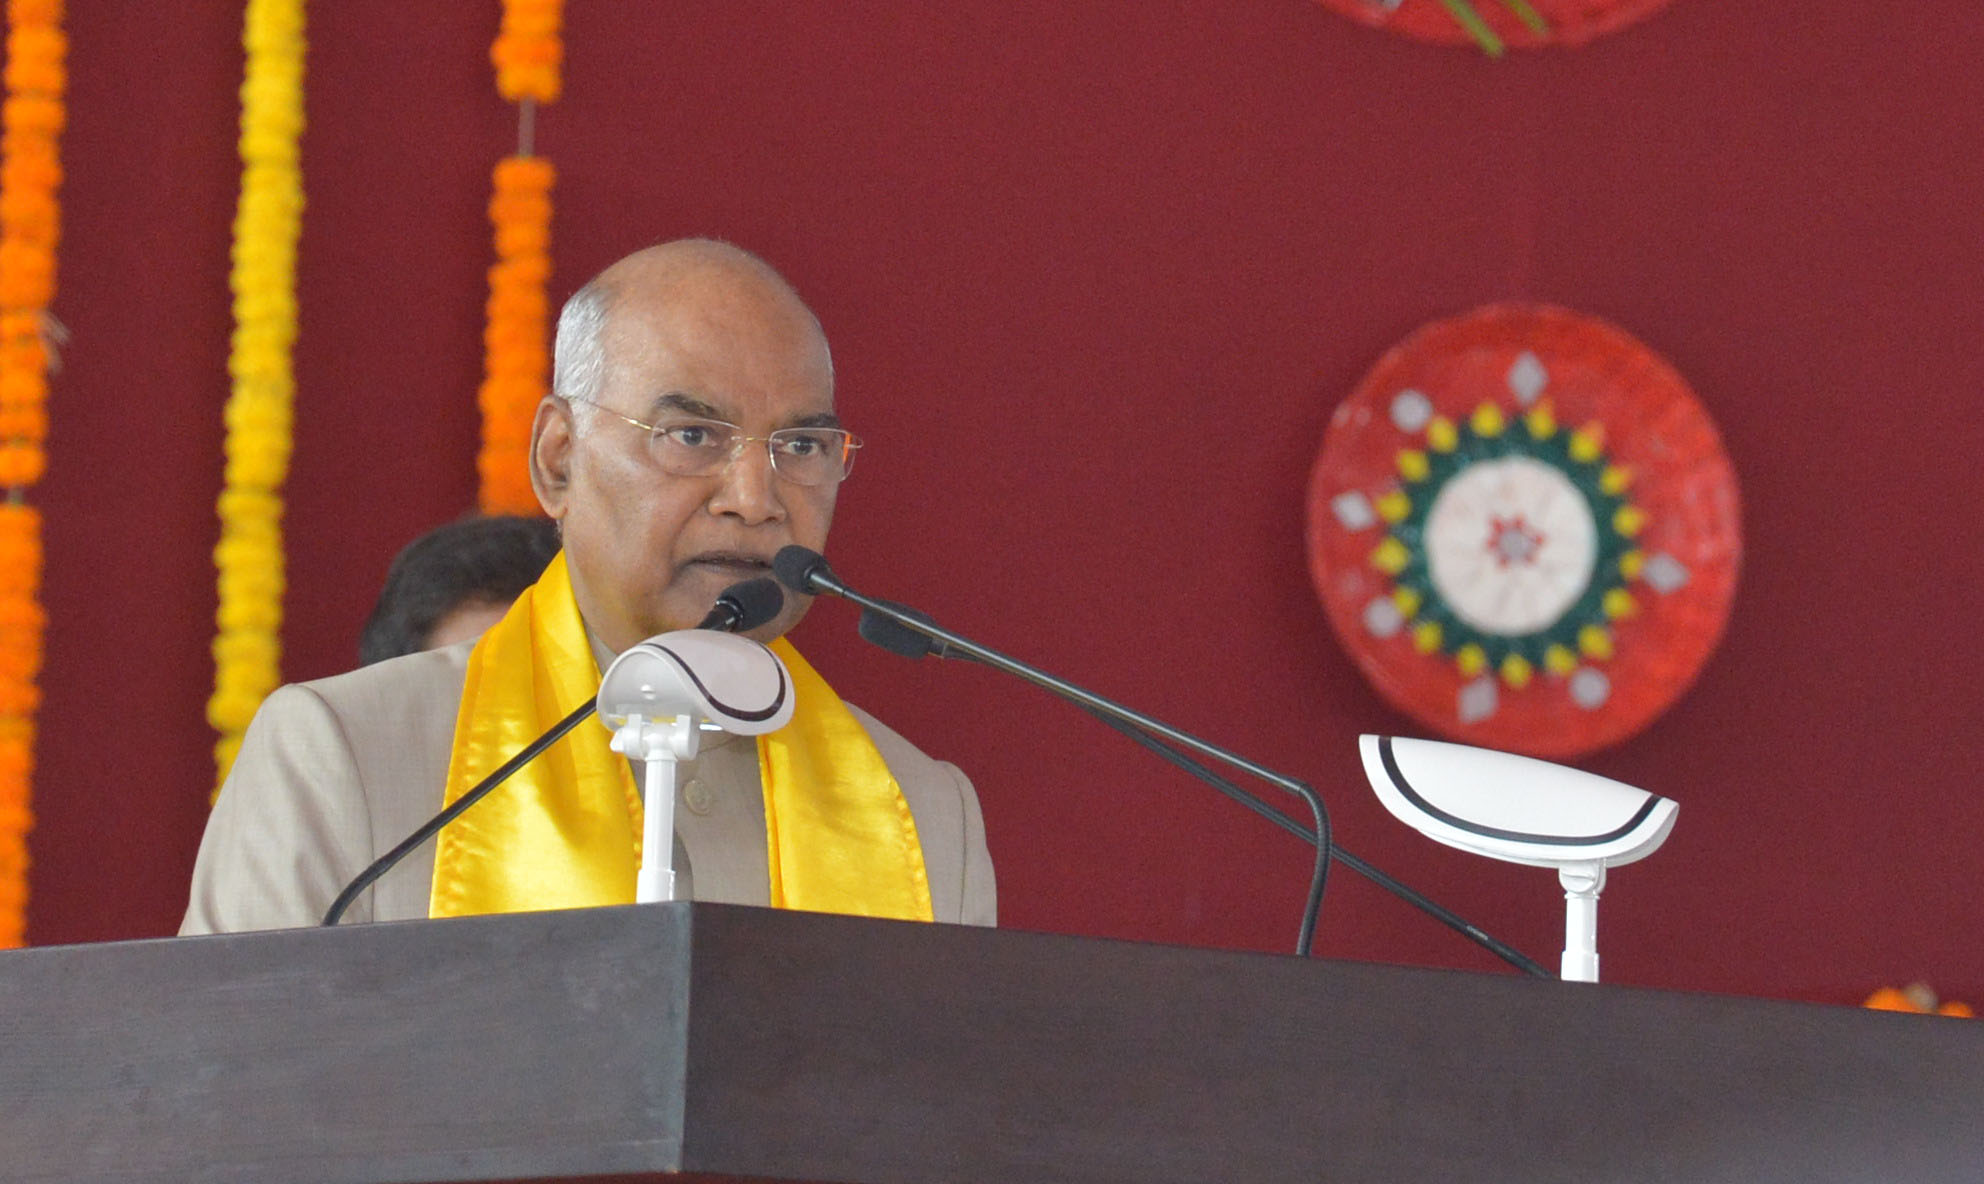 President Ram Nath Kovind completes 3 years in office